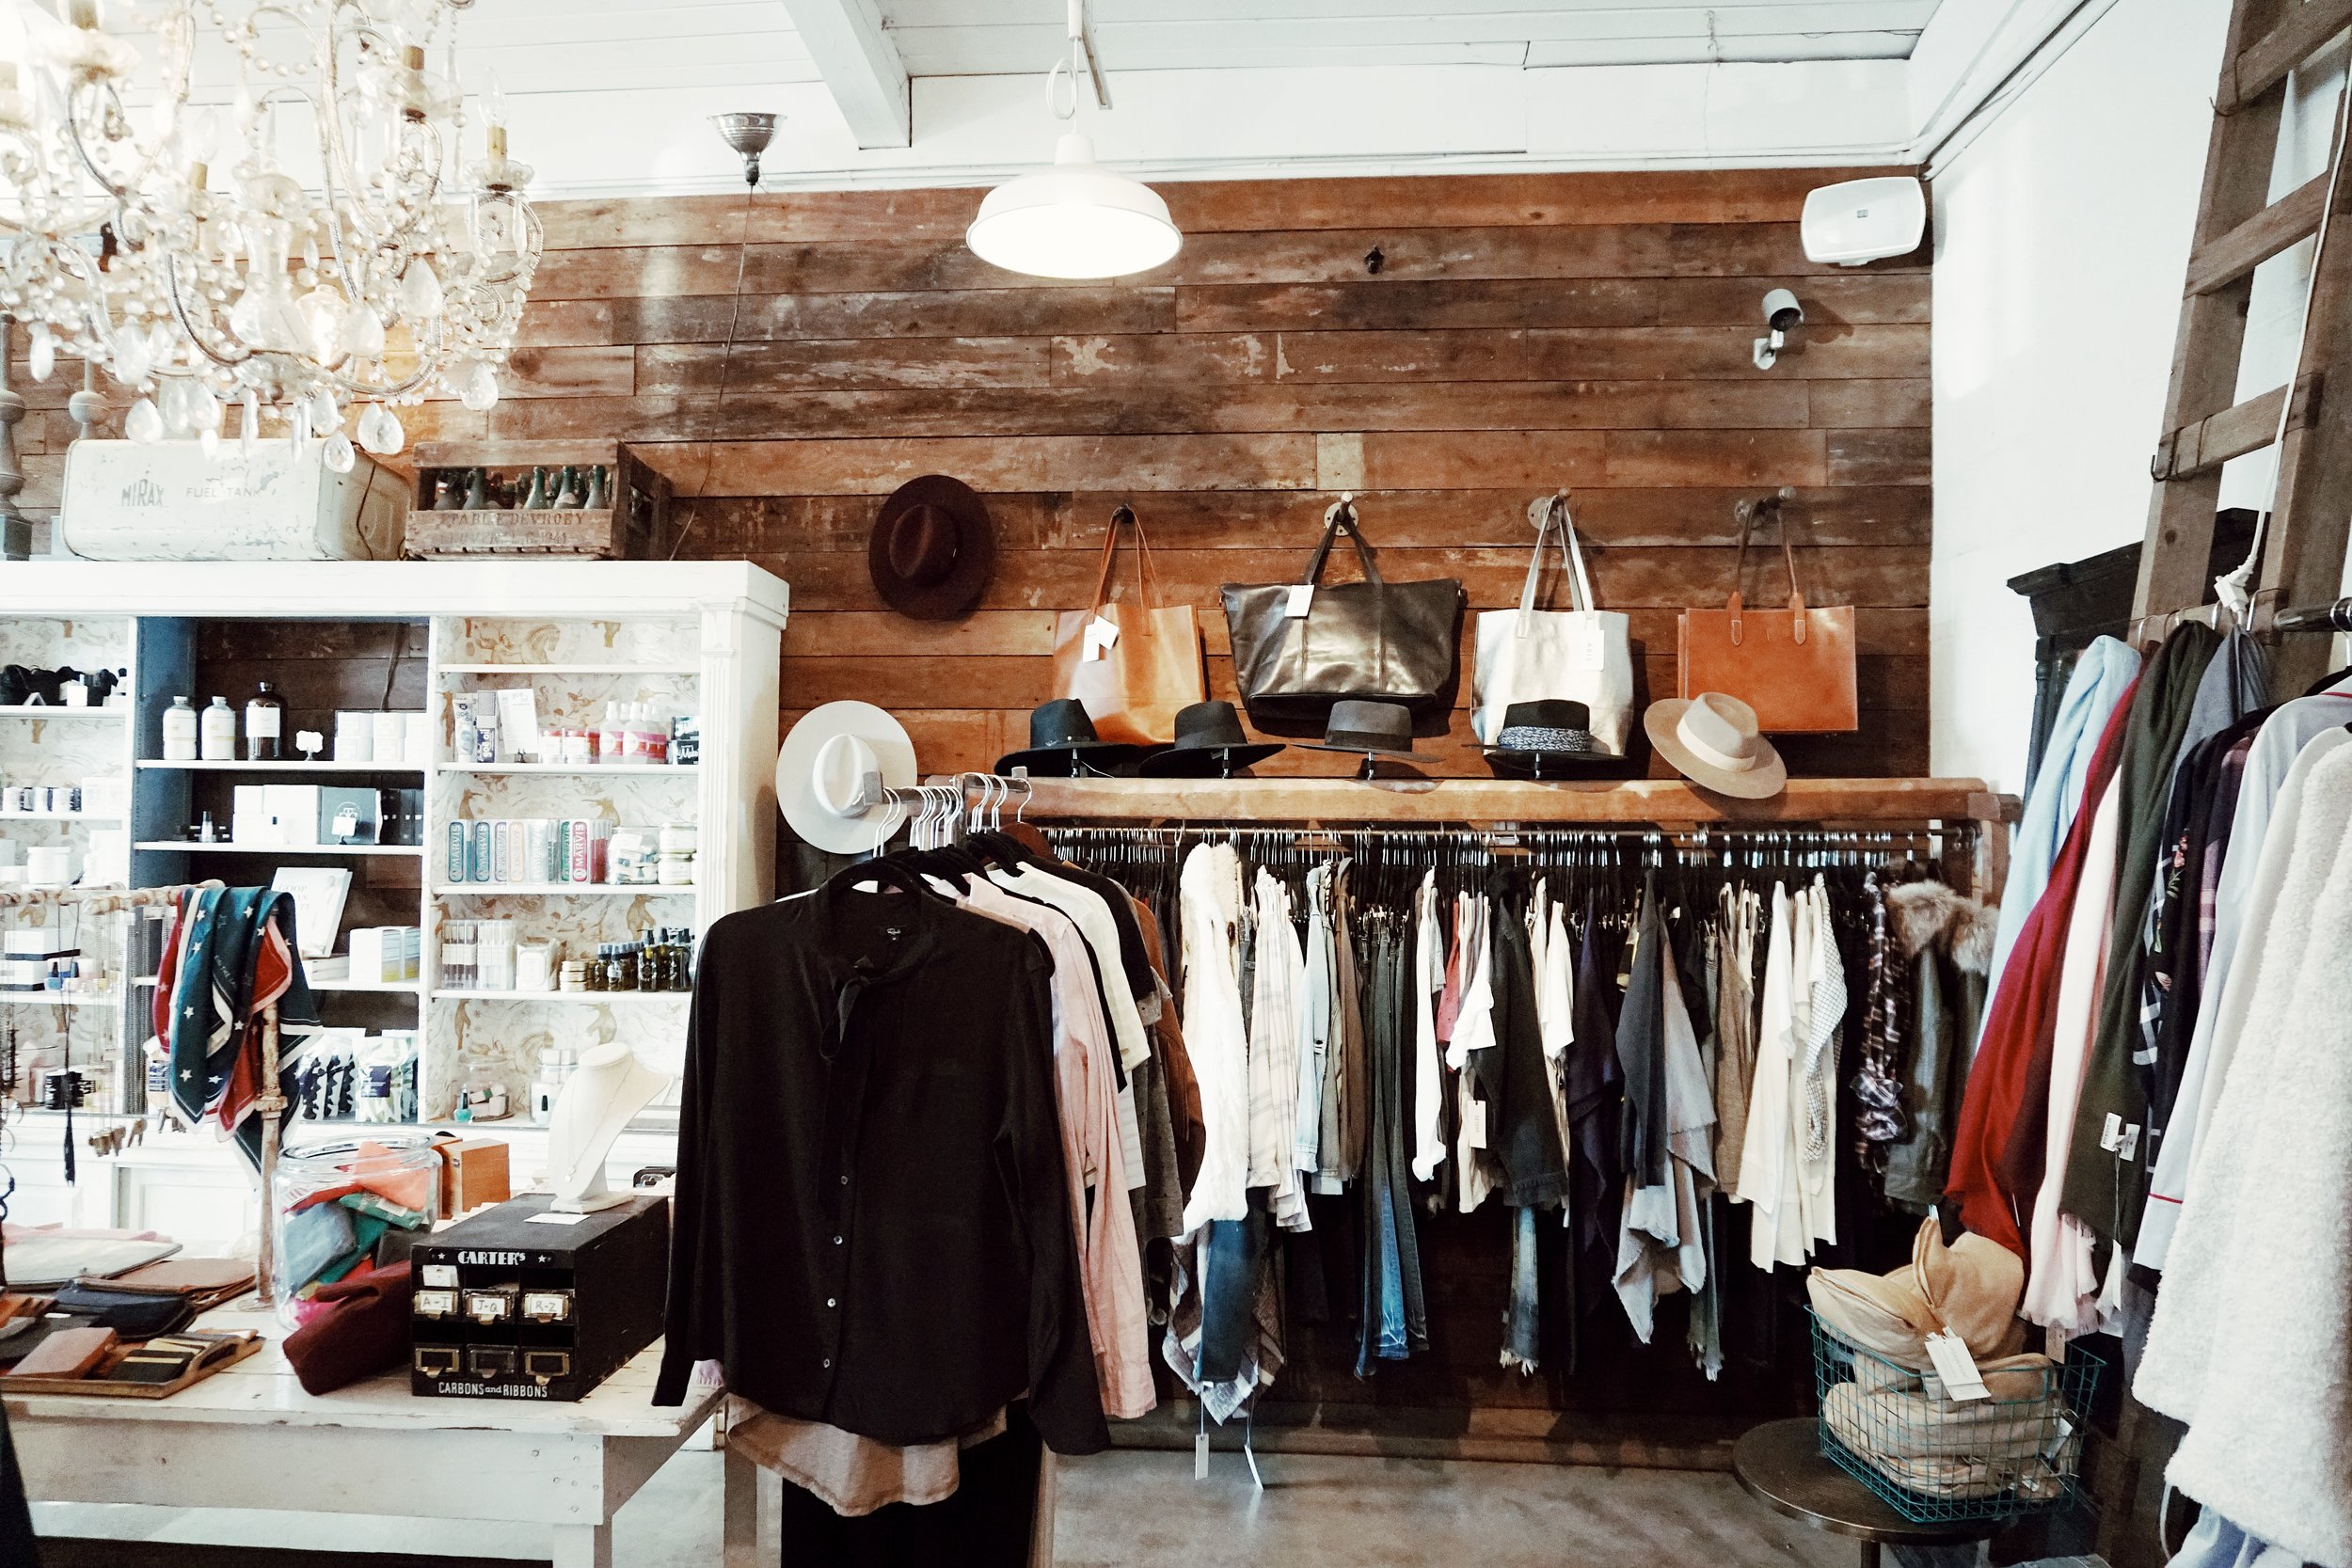 A cozy boutique interior featuring a rustic wooden wall with hats on display, chic Nashville-inspired handbags on a shelf, and a variety of clothes hanging from a metal rail along with accessories on a table.